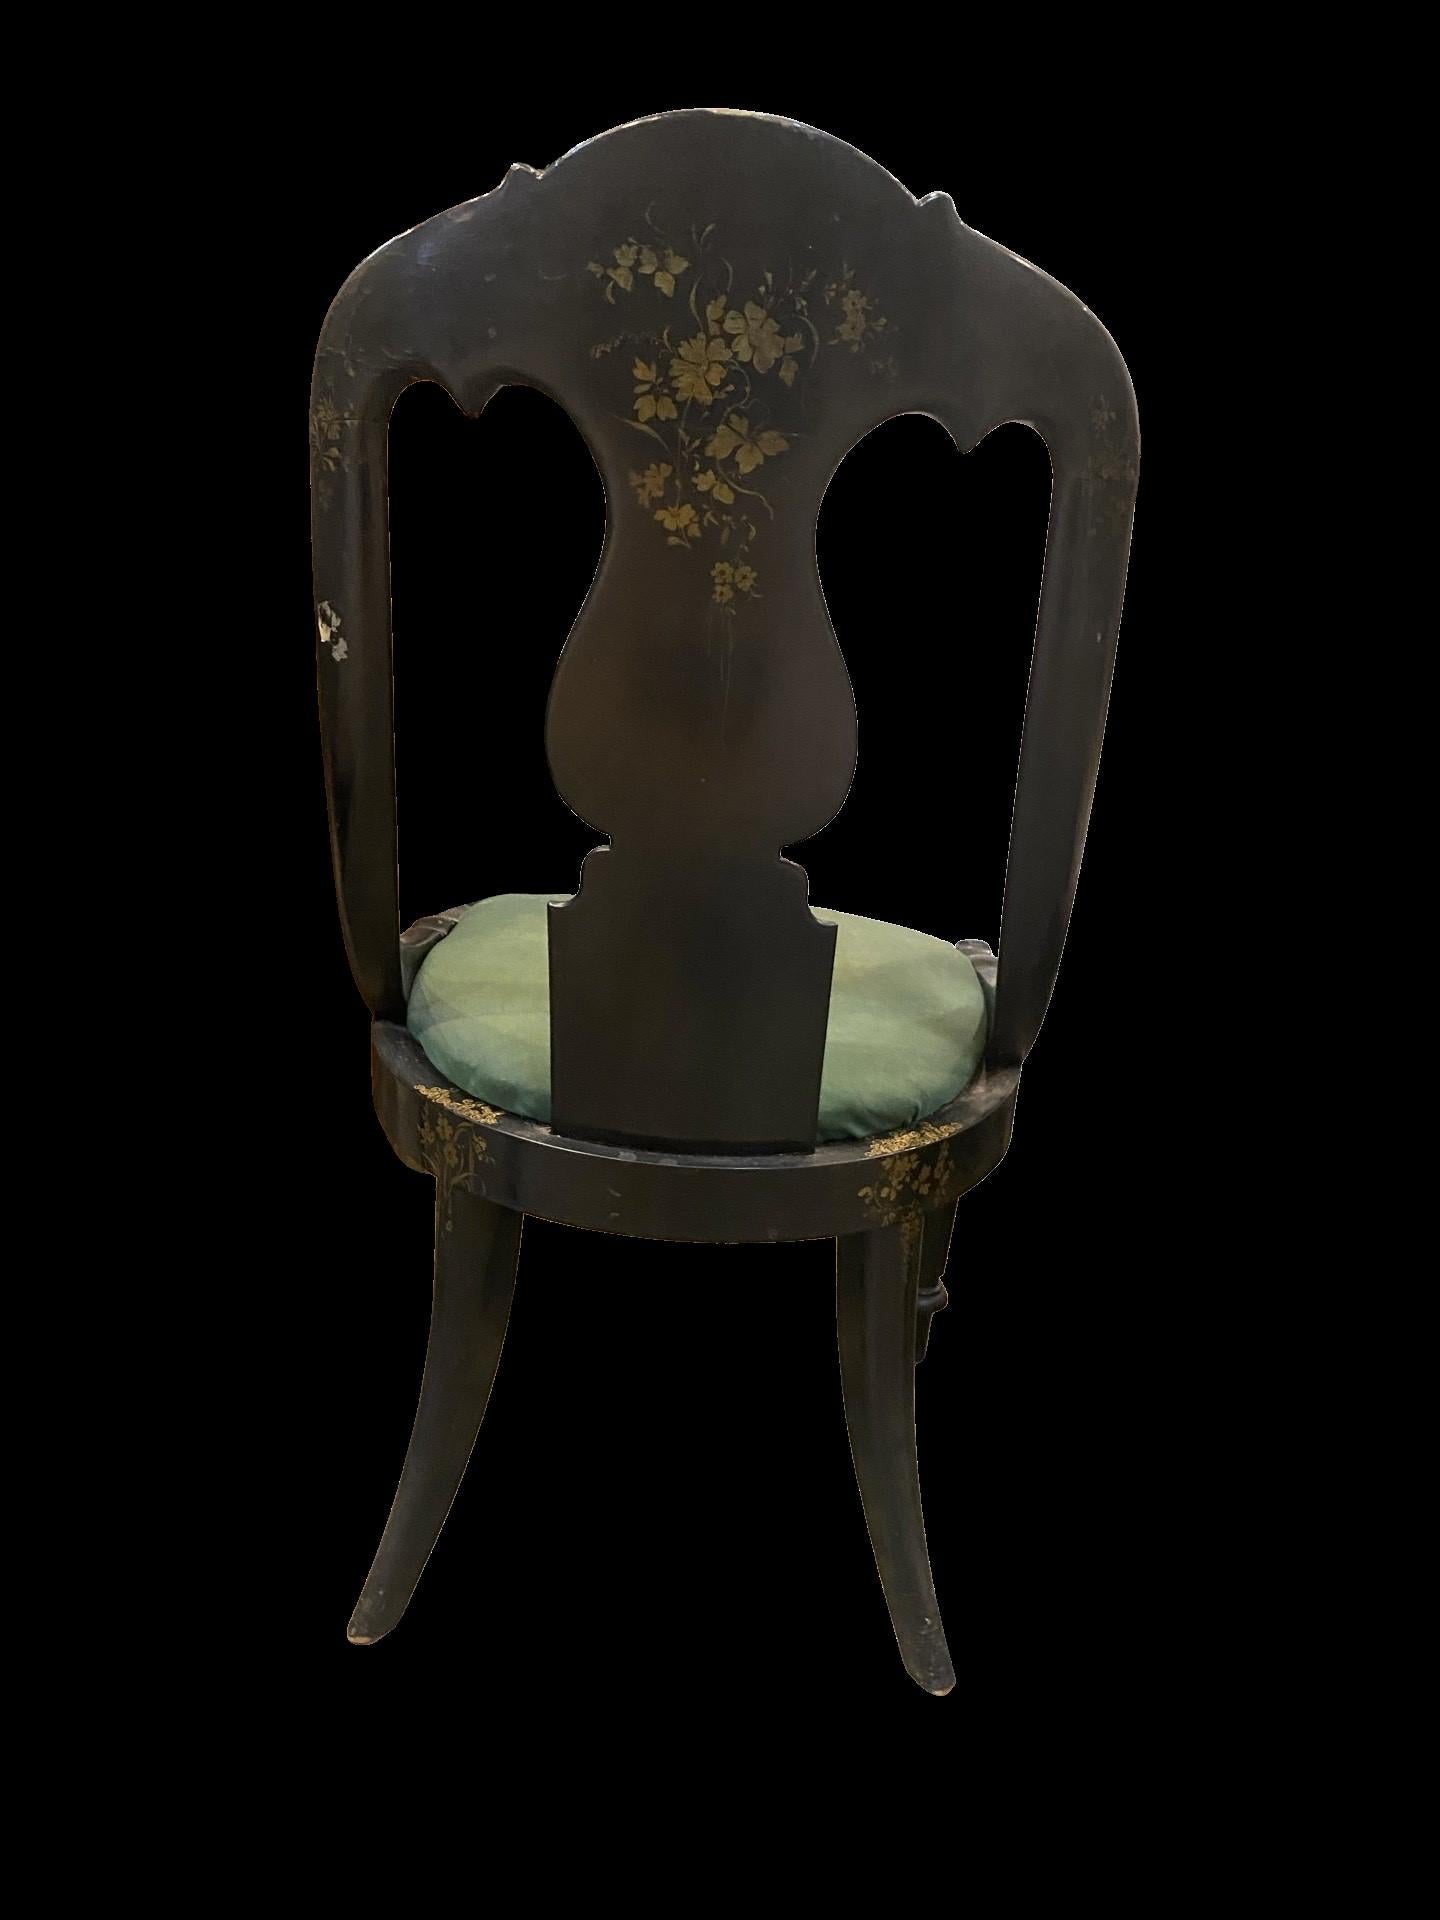 19th century Papier-mâché chair with gold leaf detail and Mother of Pearl Inlay.